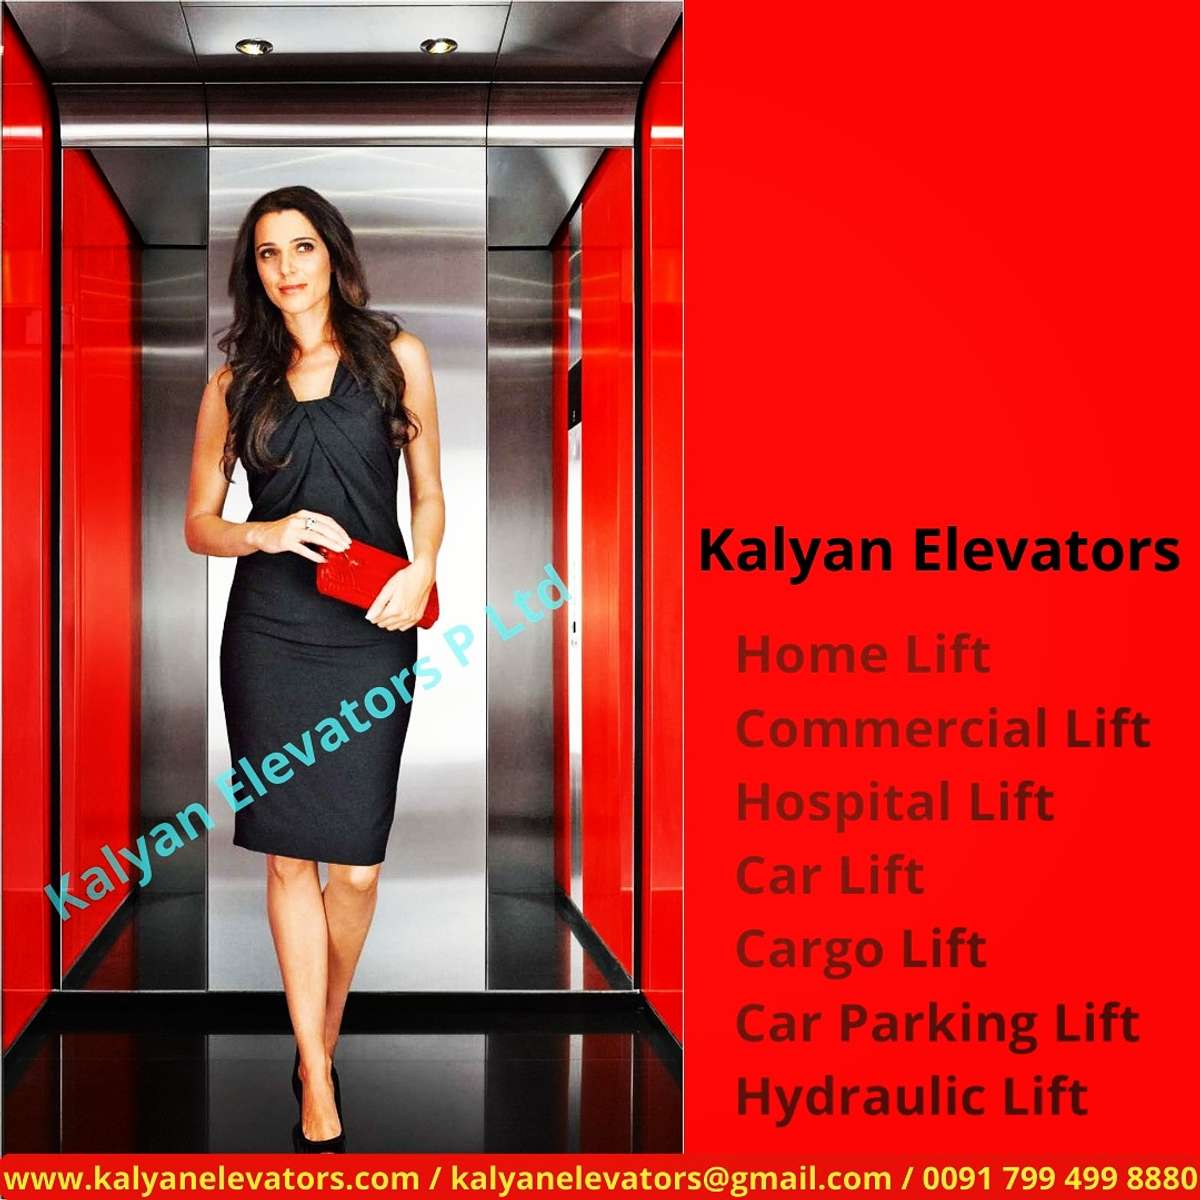 related home lifts and commercial lifts call xxxxxxxxxx